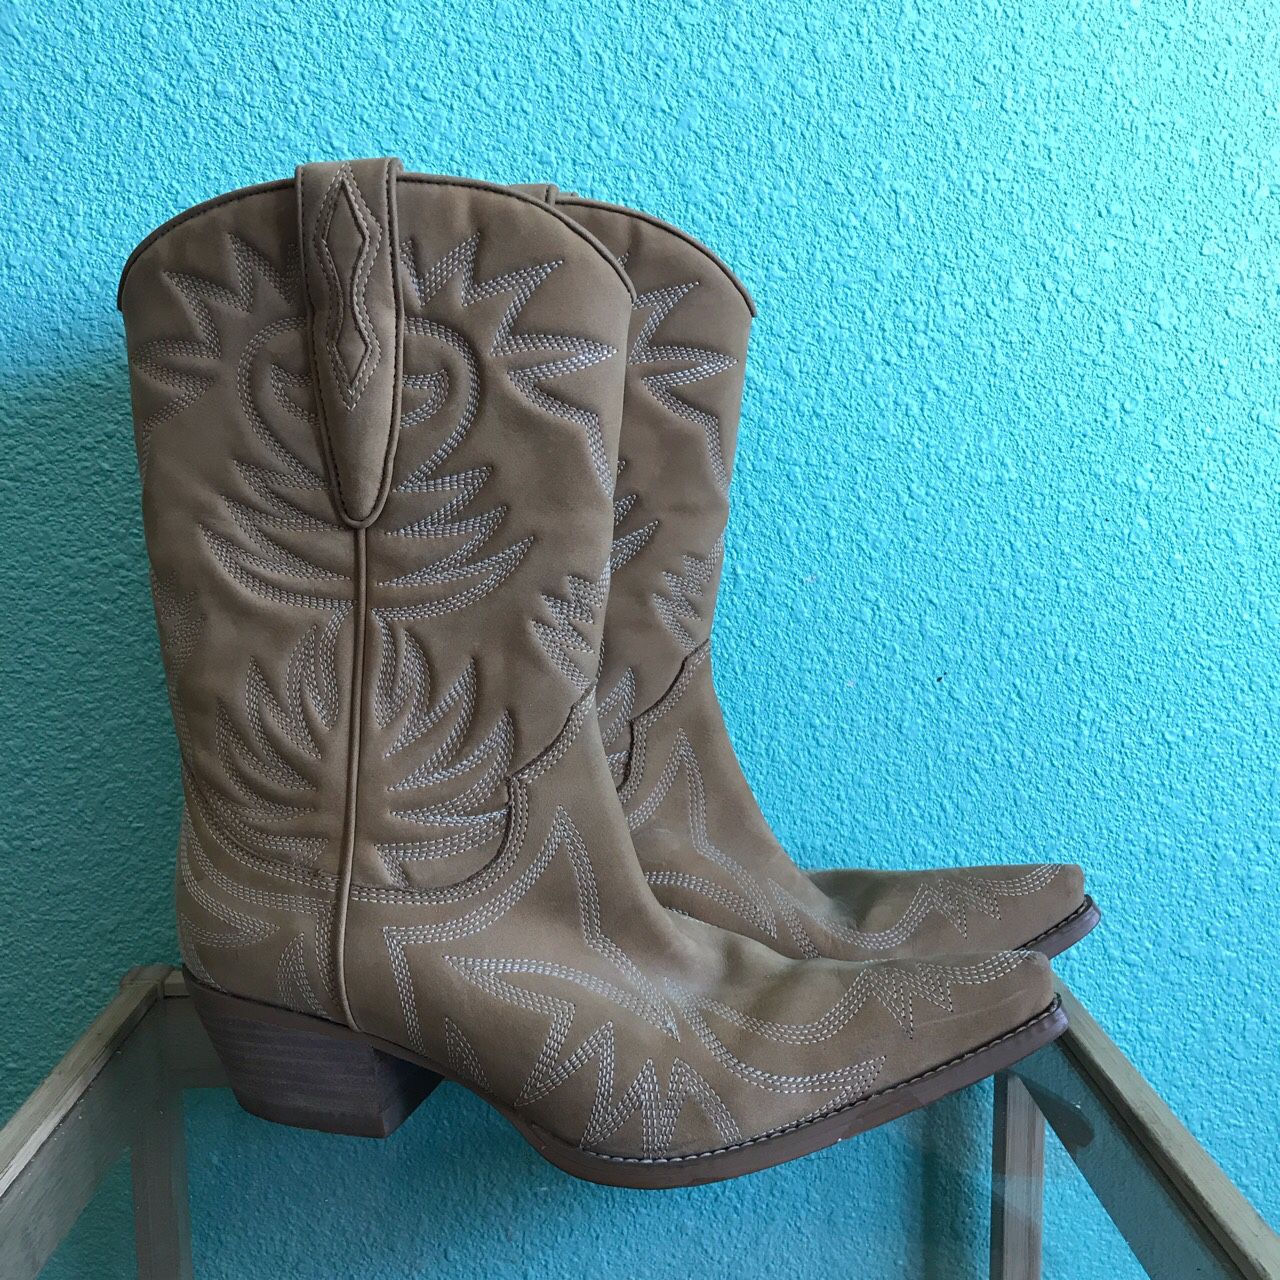 Guess Western Boot - size 6.5